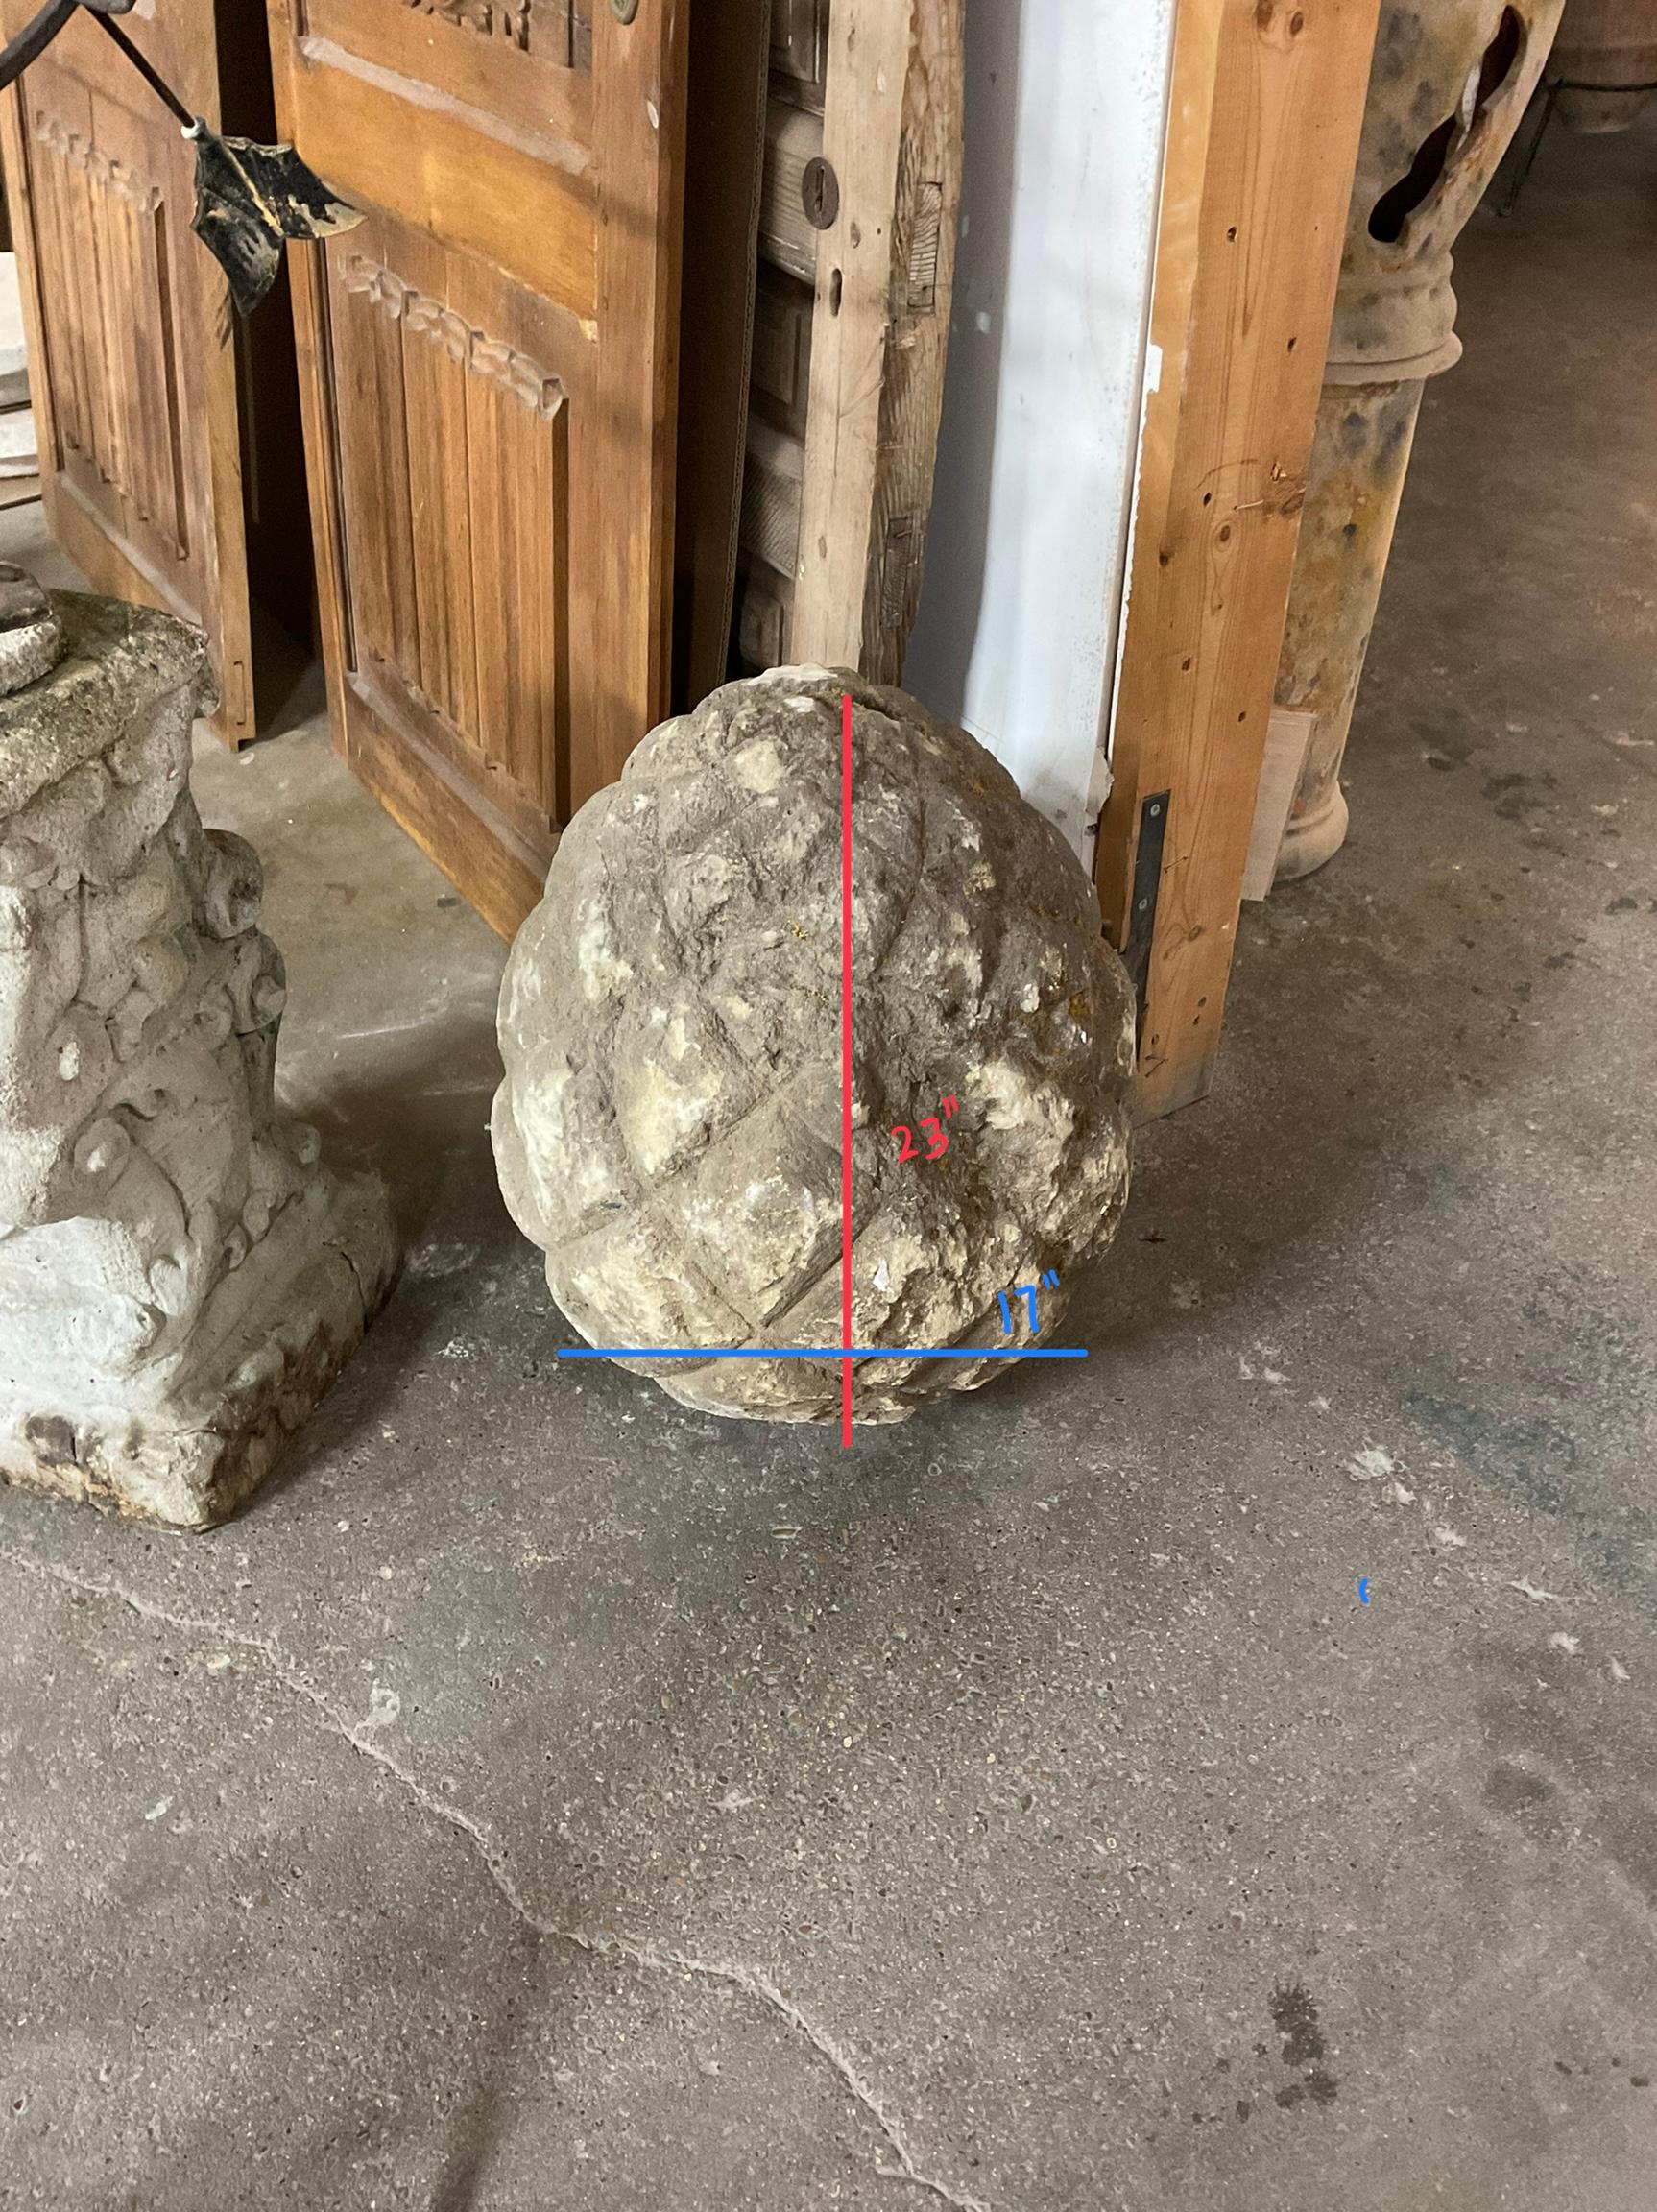 Authentic French Limestone Acorn Sculptures are from 1780 and is carefully crafted from the finest limestone. Its intricate details and classic shape capture a timeless quality. This finely-made piece is sure to be a stunning addition to any home.